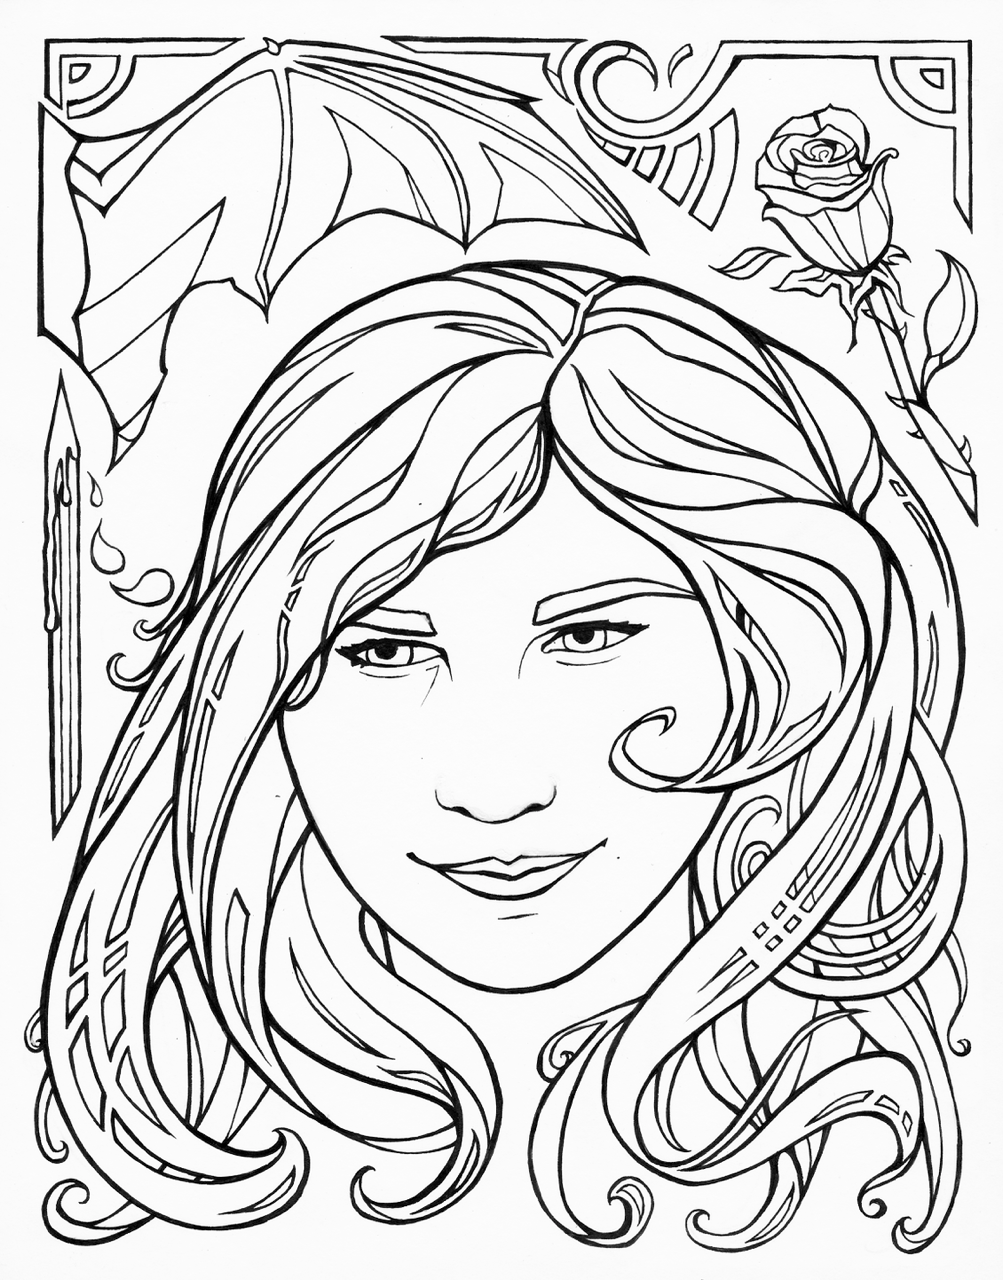 Download Halloween coloring page- Witcher/Bruxa inspired,... - to Wander and Not be Lost